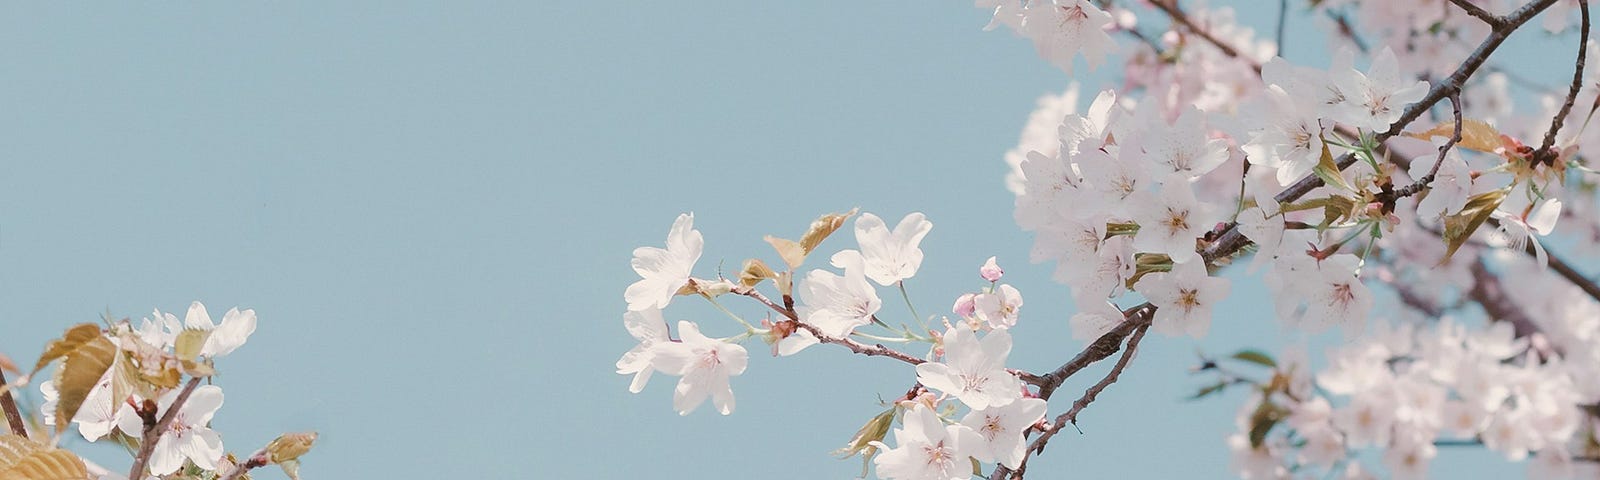 white cherry blossom flowers as seen from below with a blue sky behind them